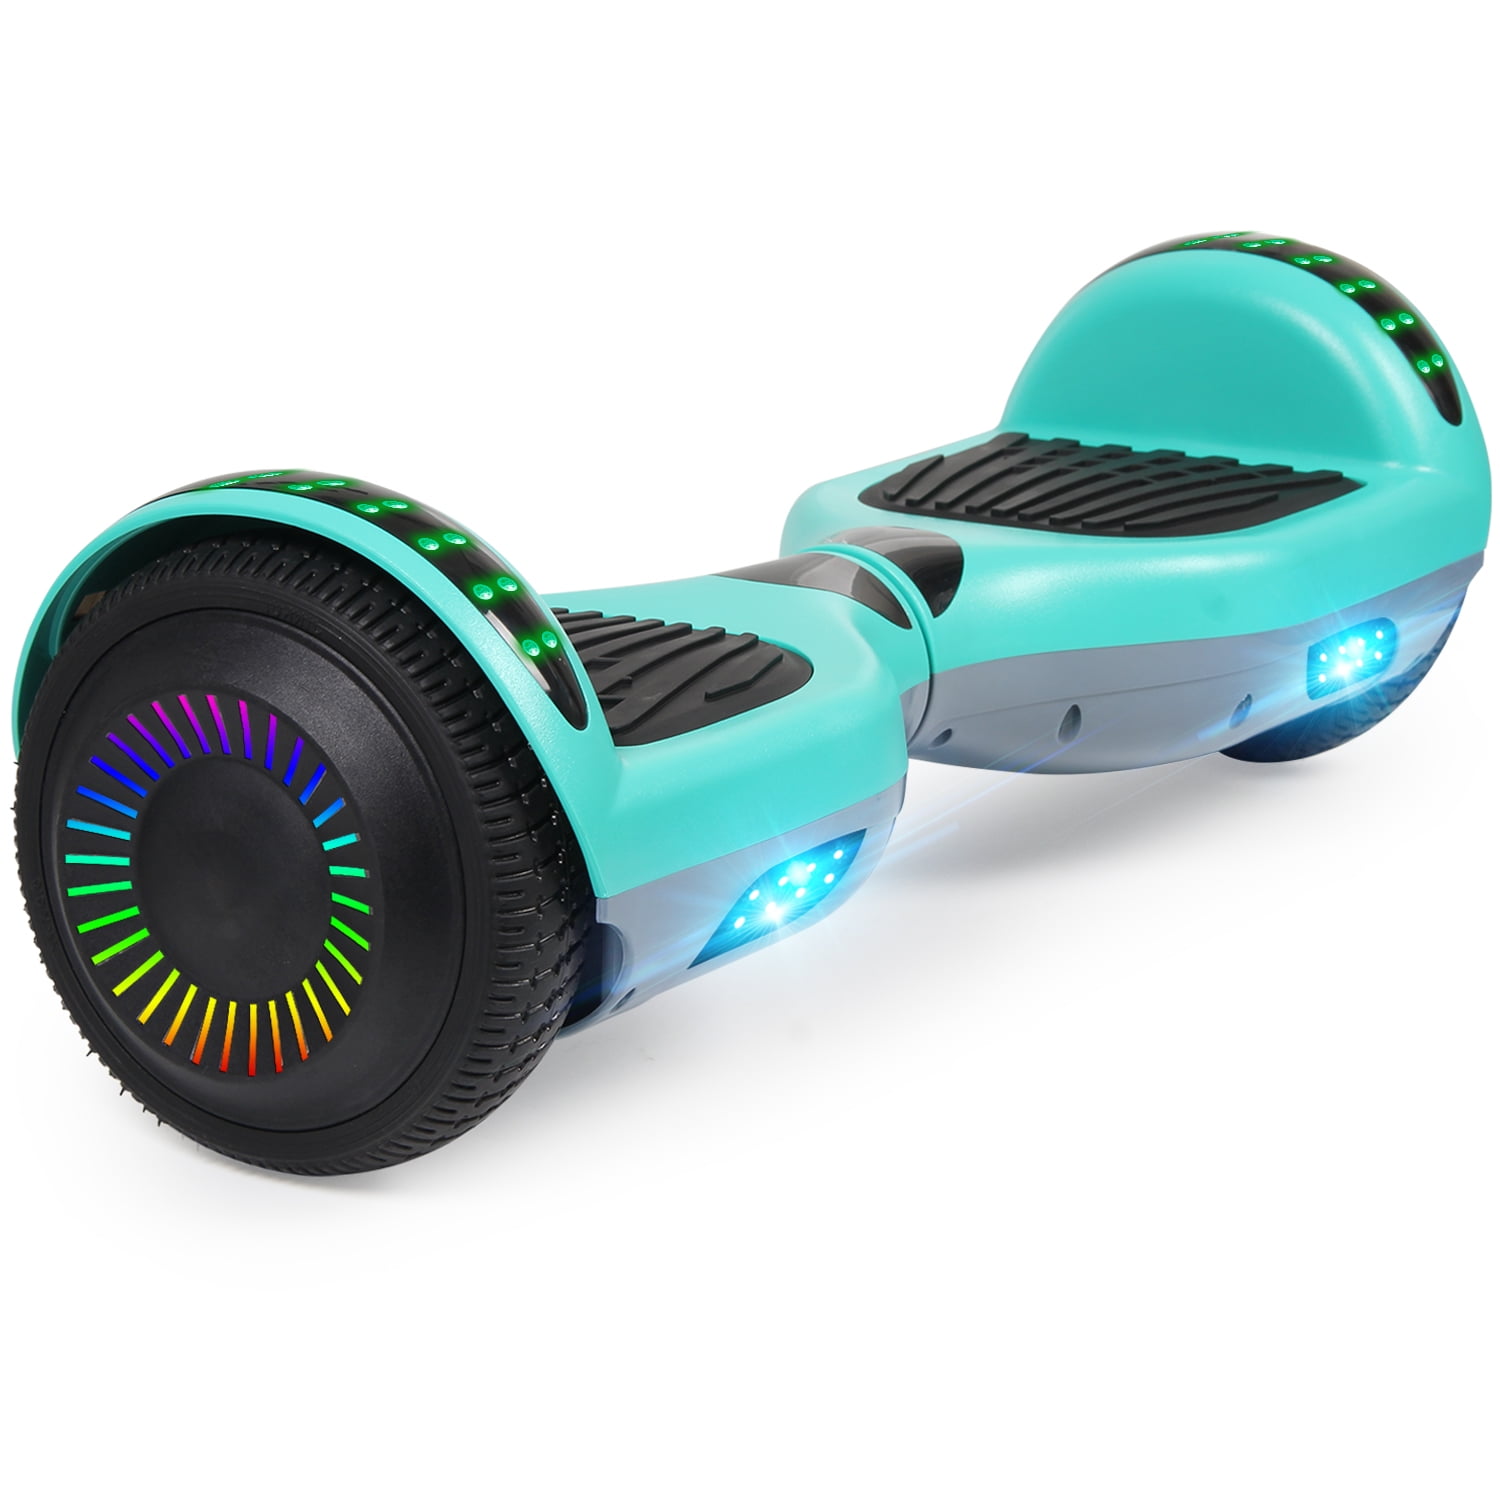 6.5" LED Bluetooth HoverBoard offroad Balancing Electric Scooter for kids No Bag 